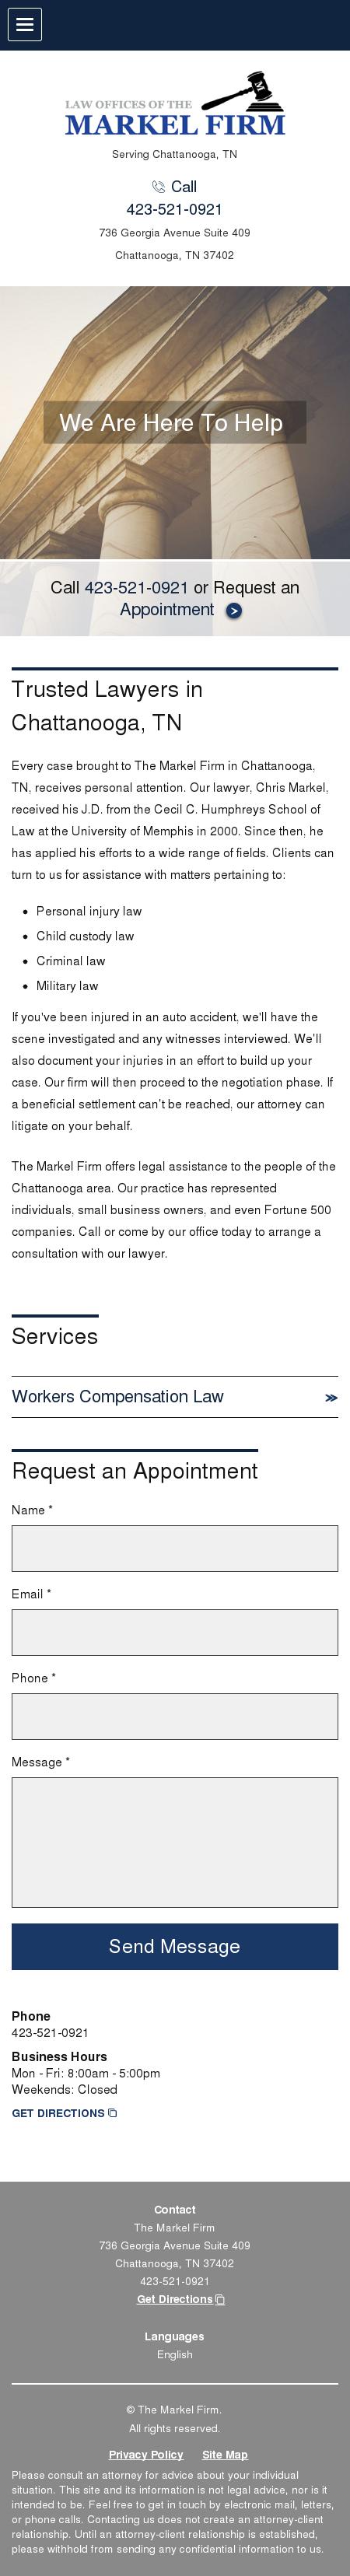 Sauser Robert W Attorney at Law - Chattanooga TN Lawyers